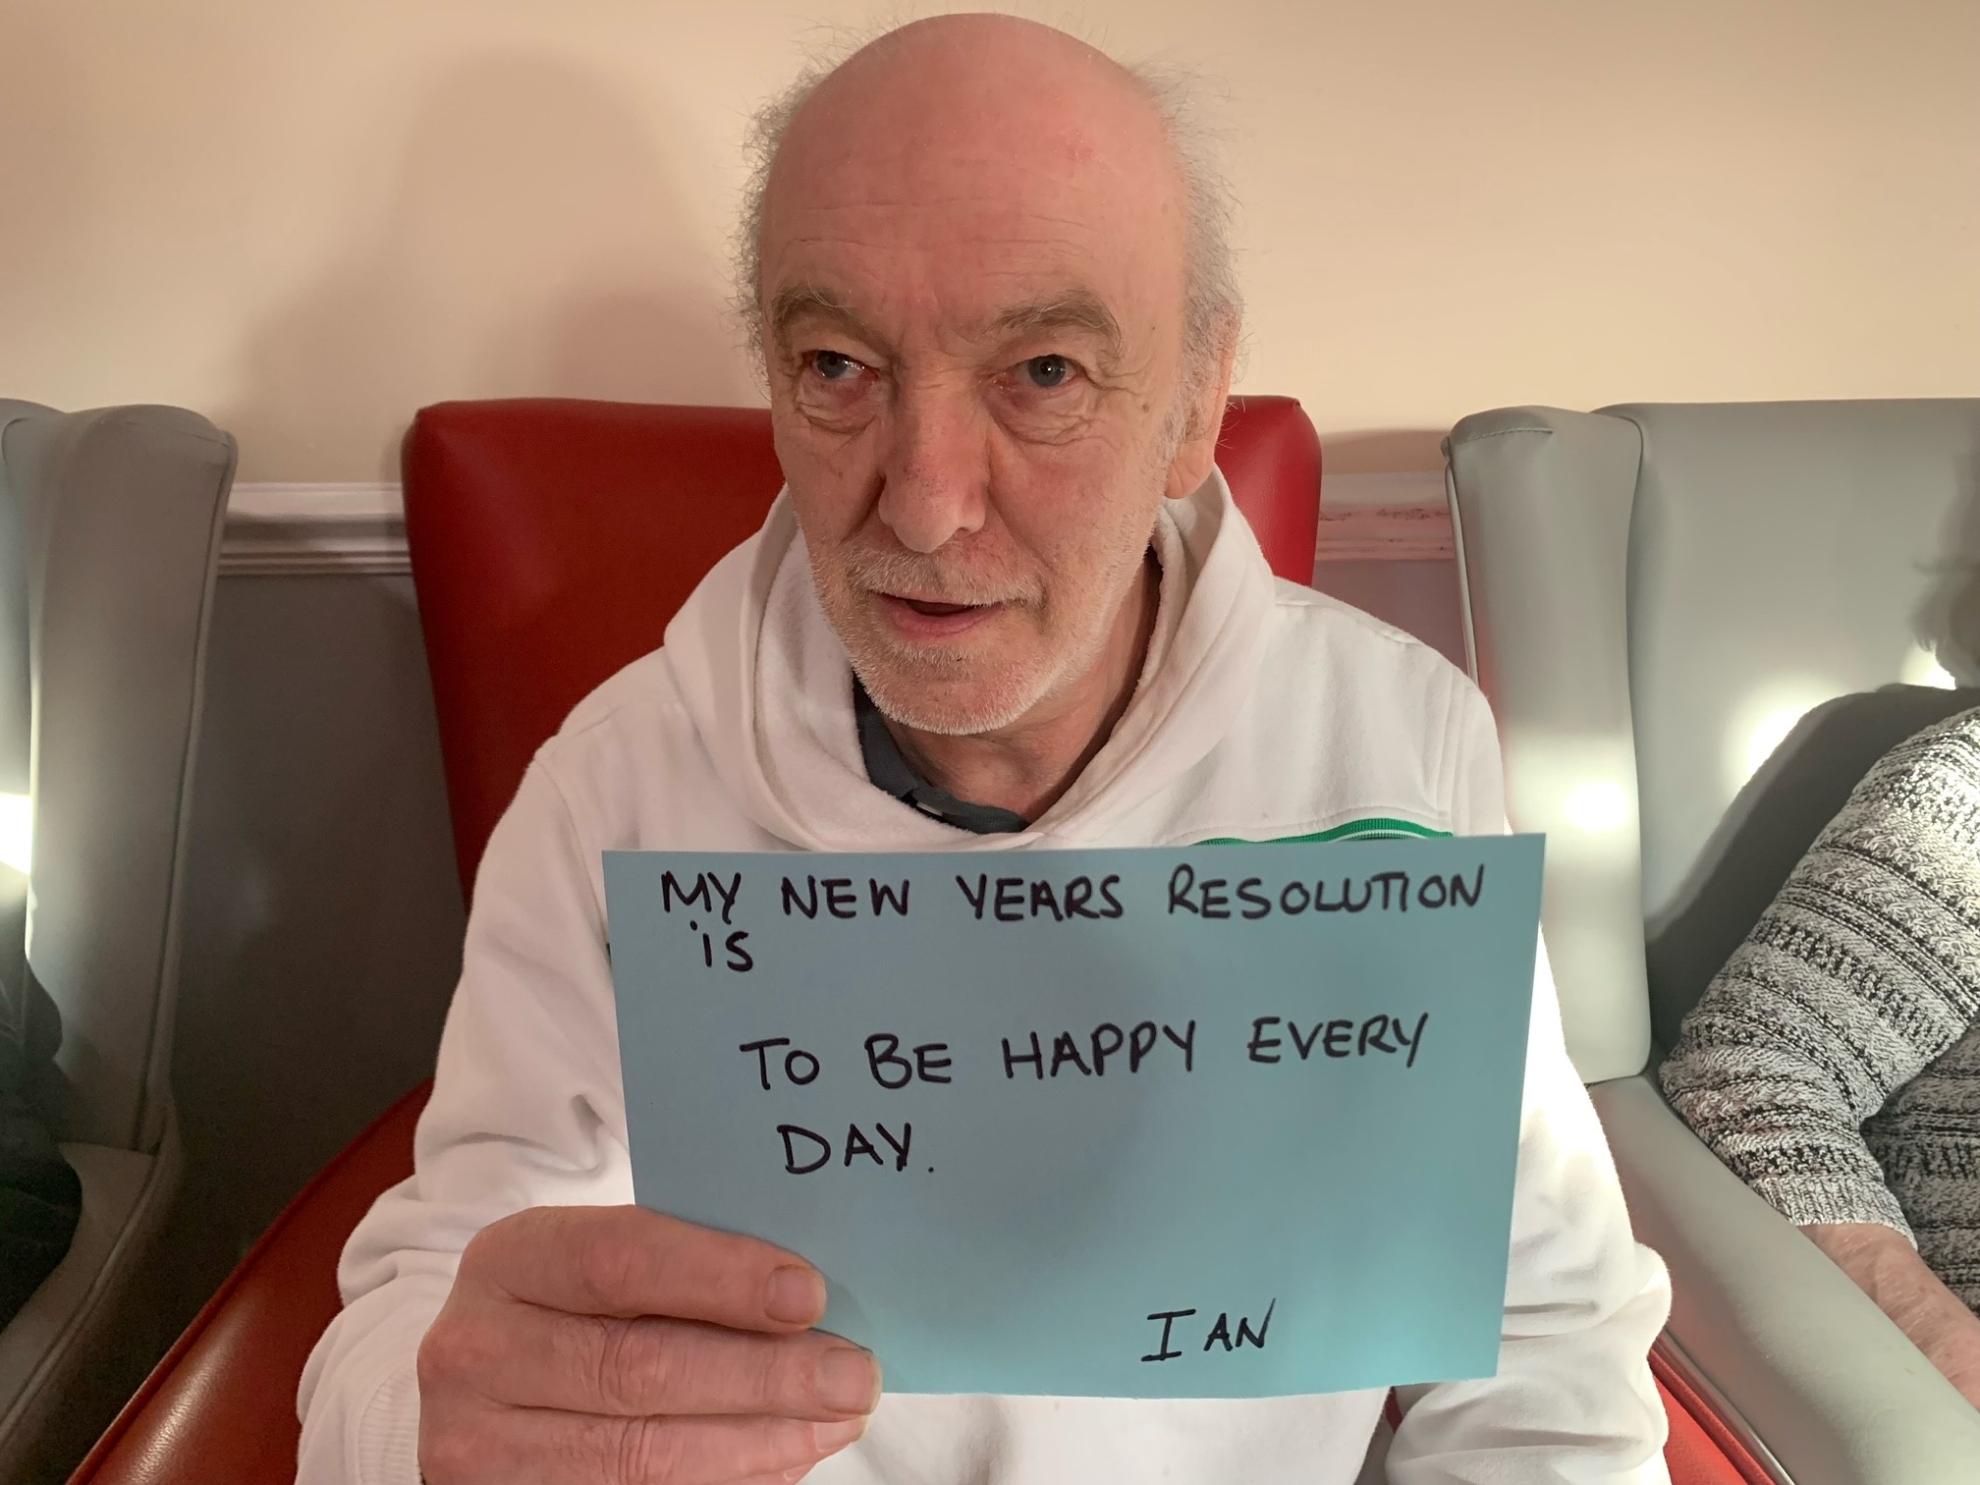 New Year's Resolution from the residents at Paddock Stile Manor Dementia Care Home